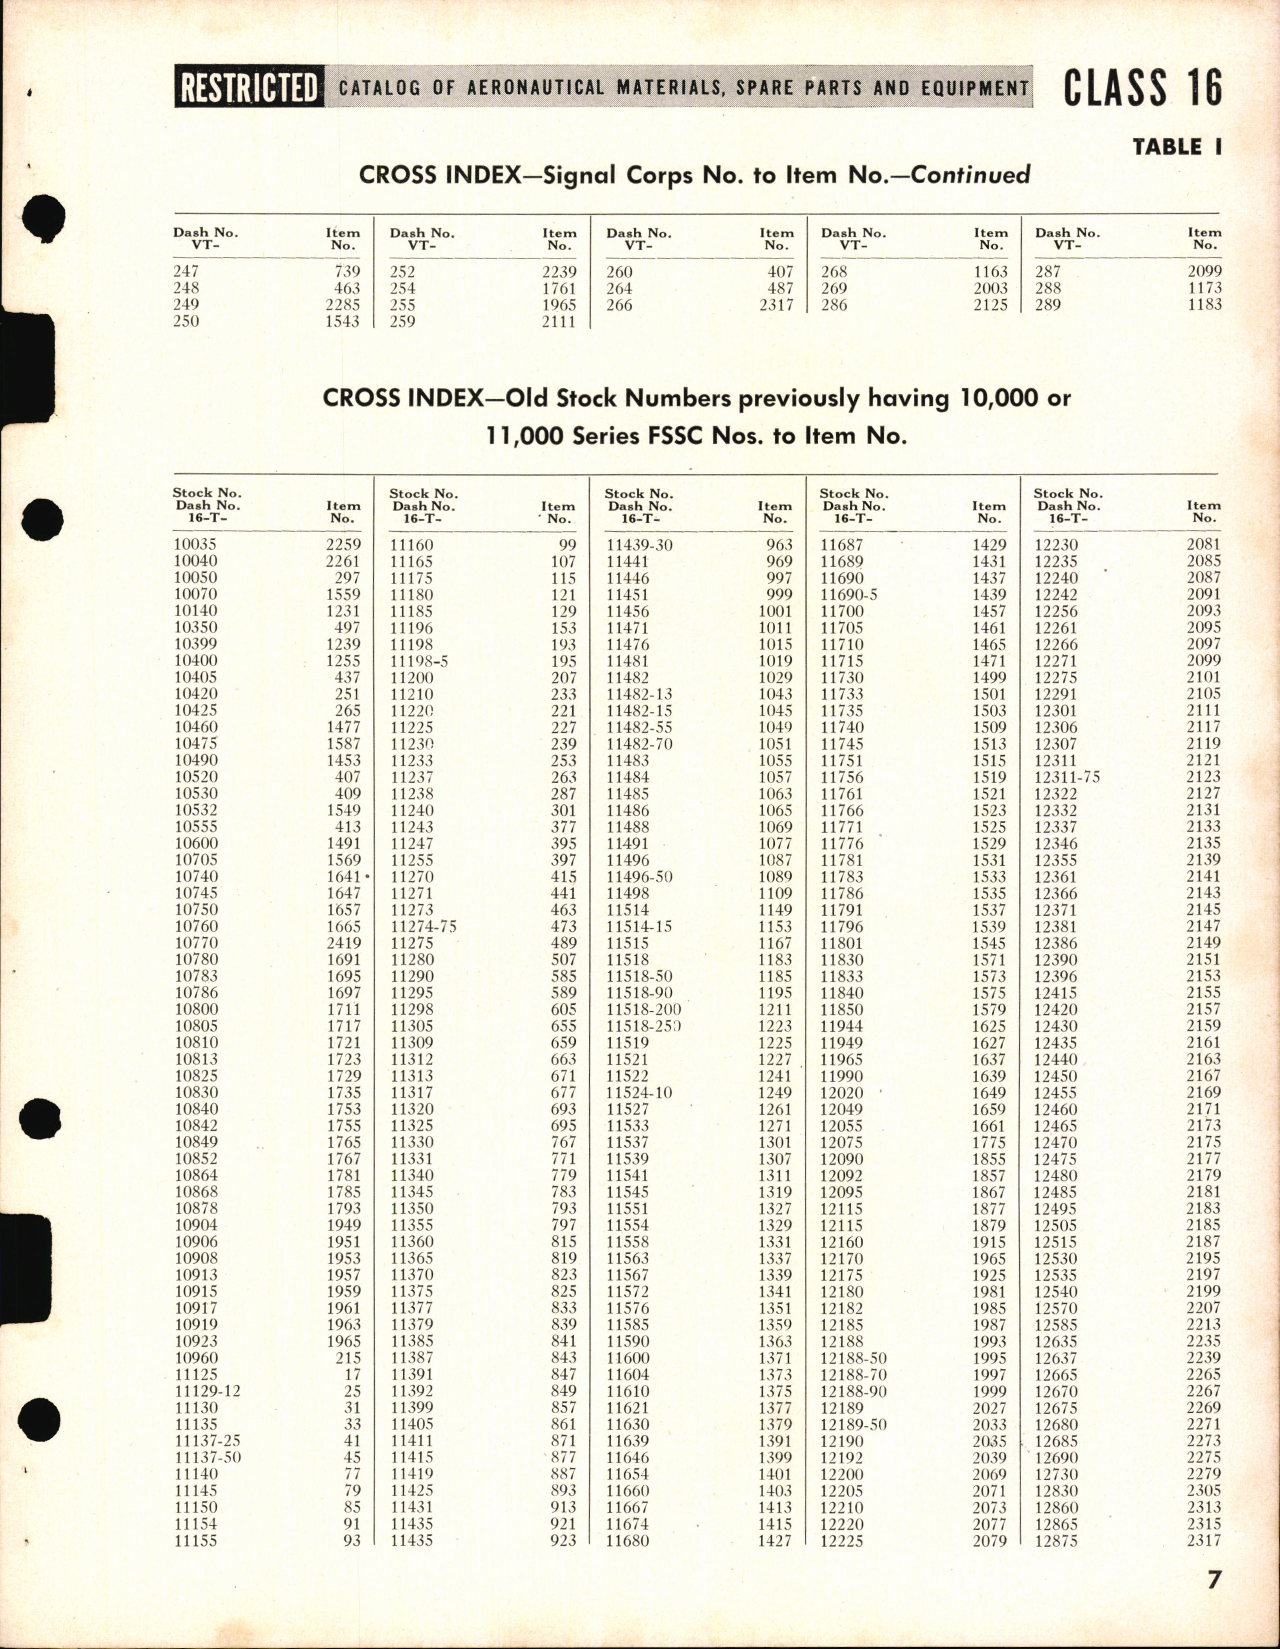 Sample page 7 from AirCorps Library document: Radio Vacuum Tubes